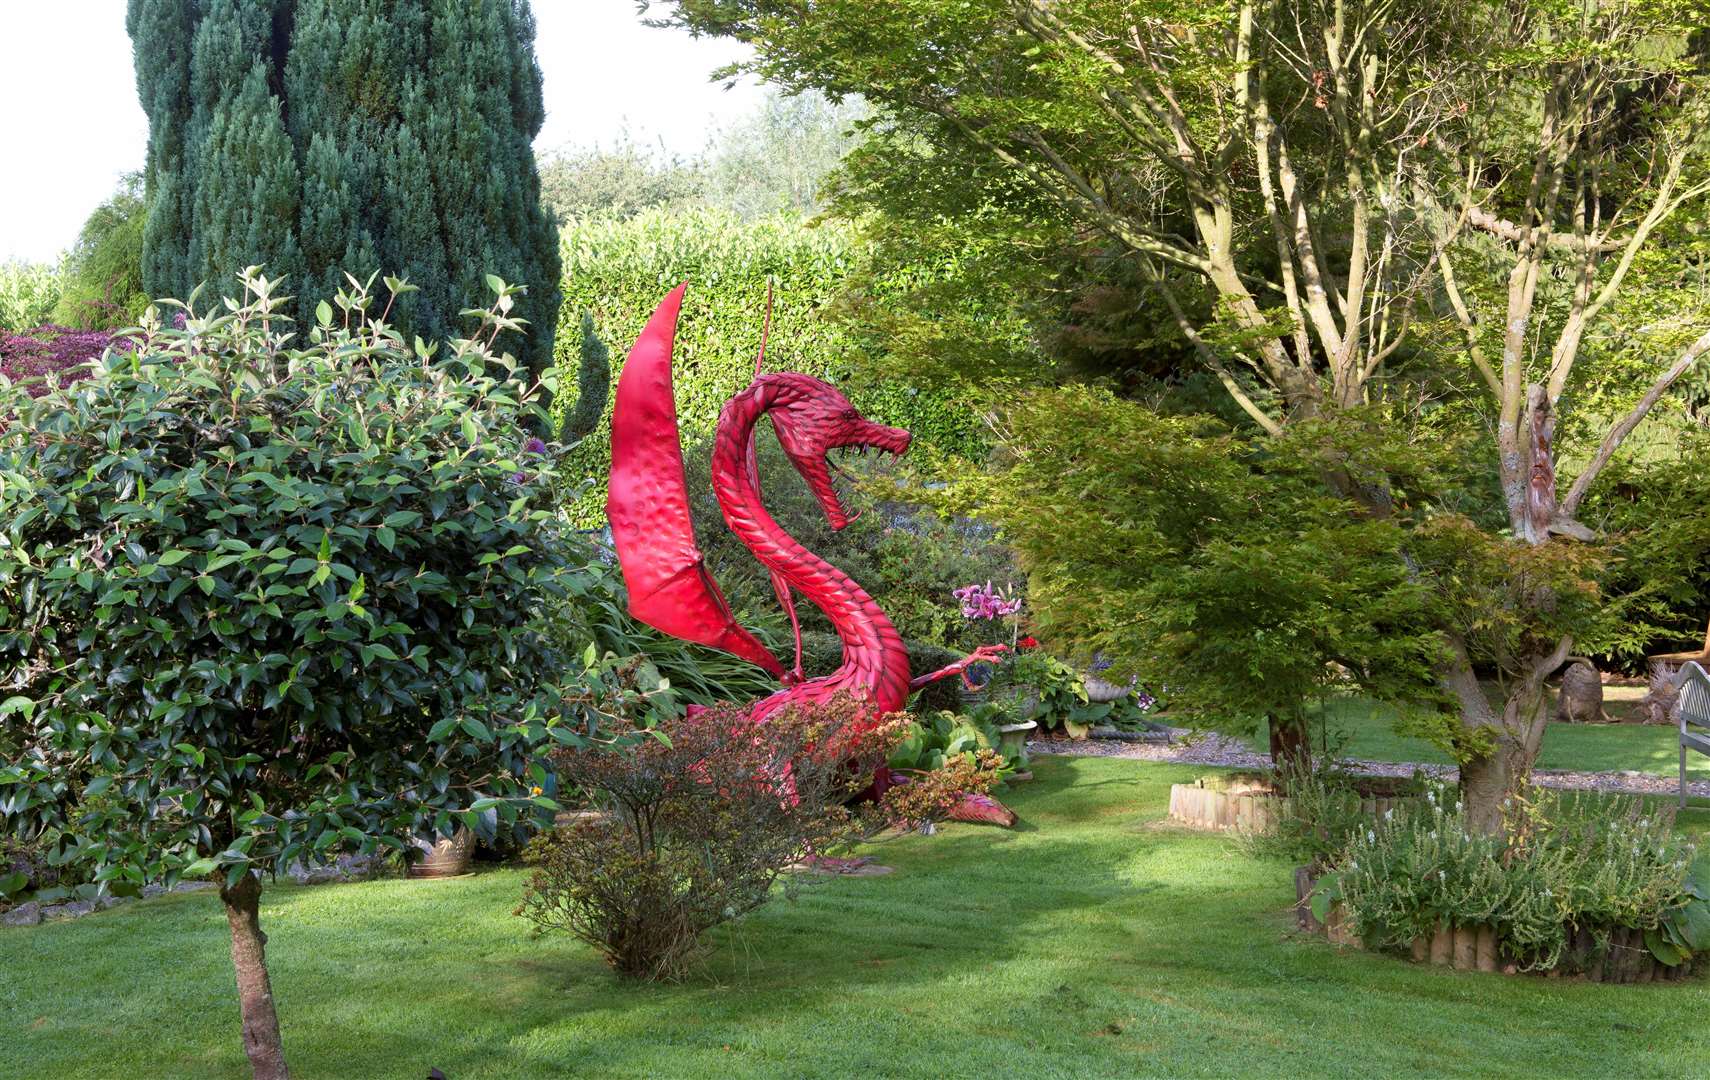 Find quirky sculptures and stunning flowers in Kent’s summer gardens. Picture: Leigh Clapp